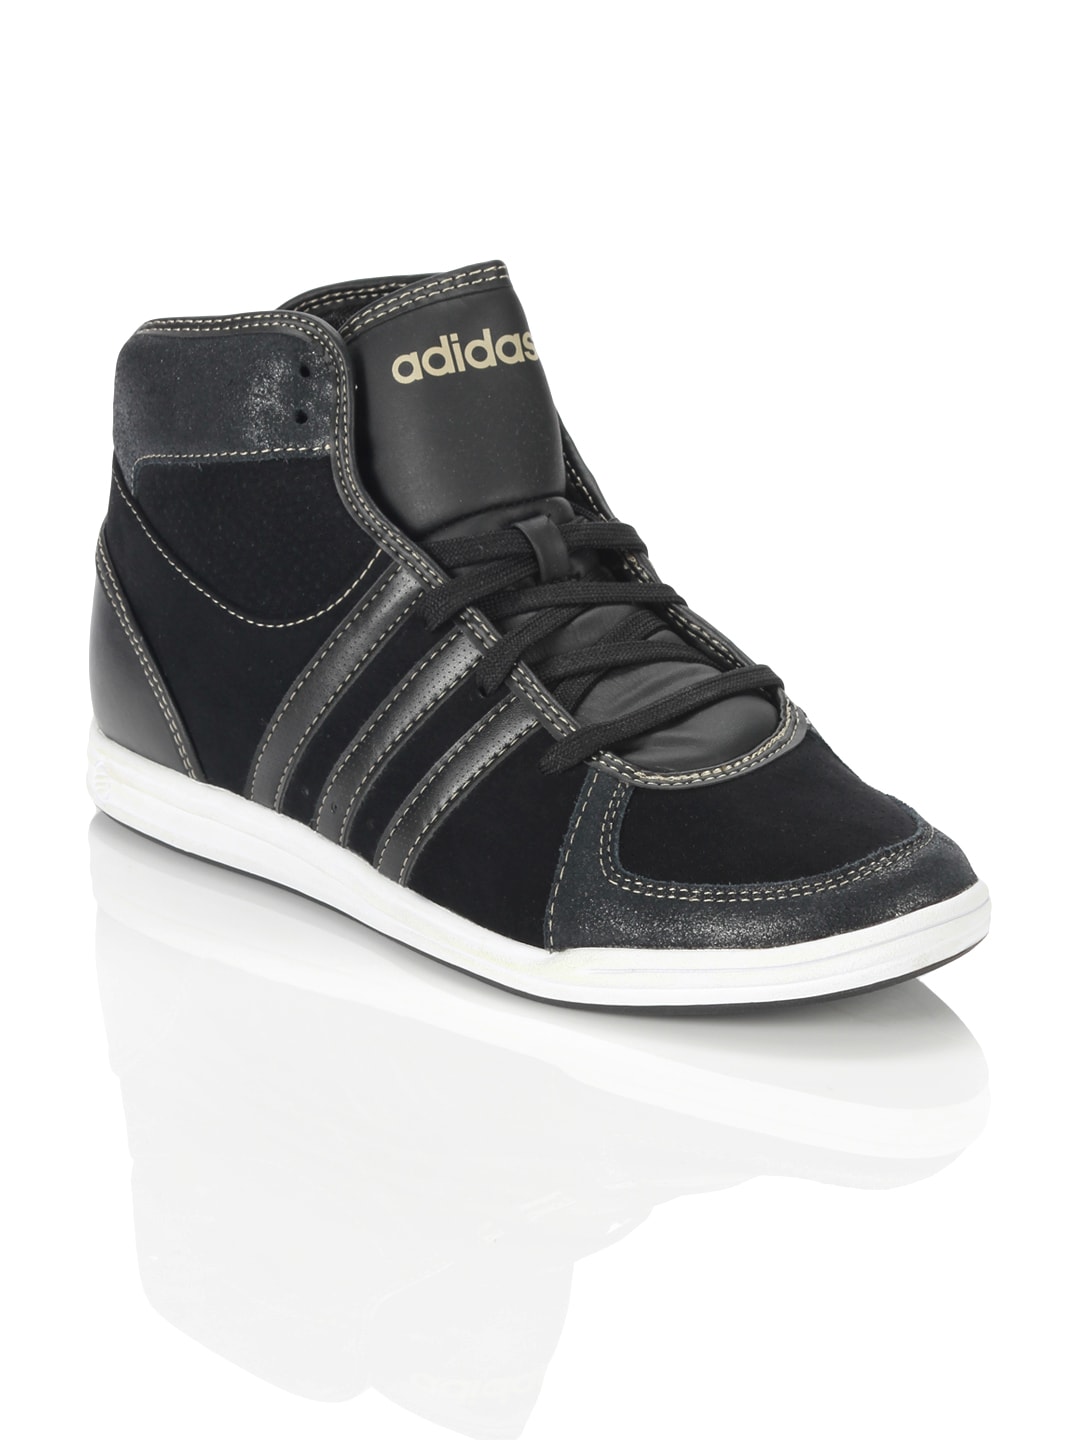 ADIDAS Neo Men Court Sequence Black Shoes